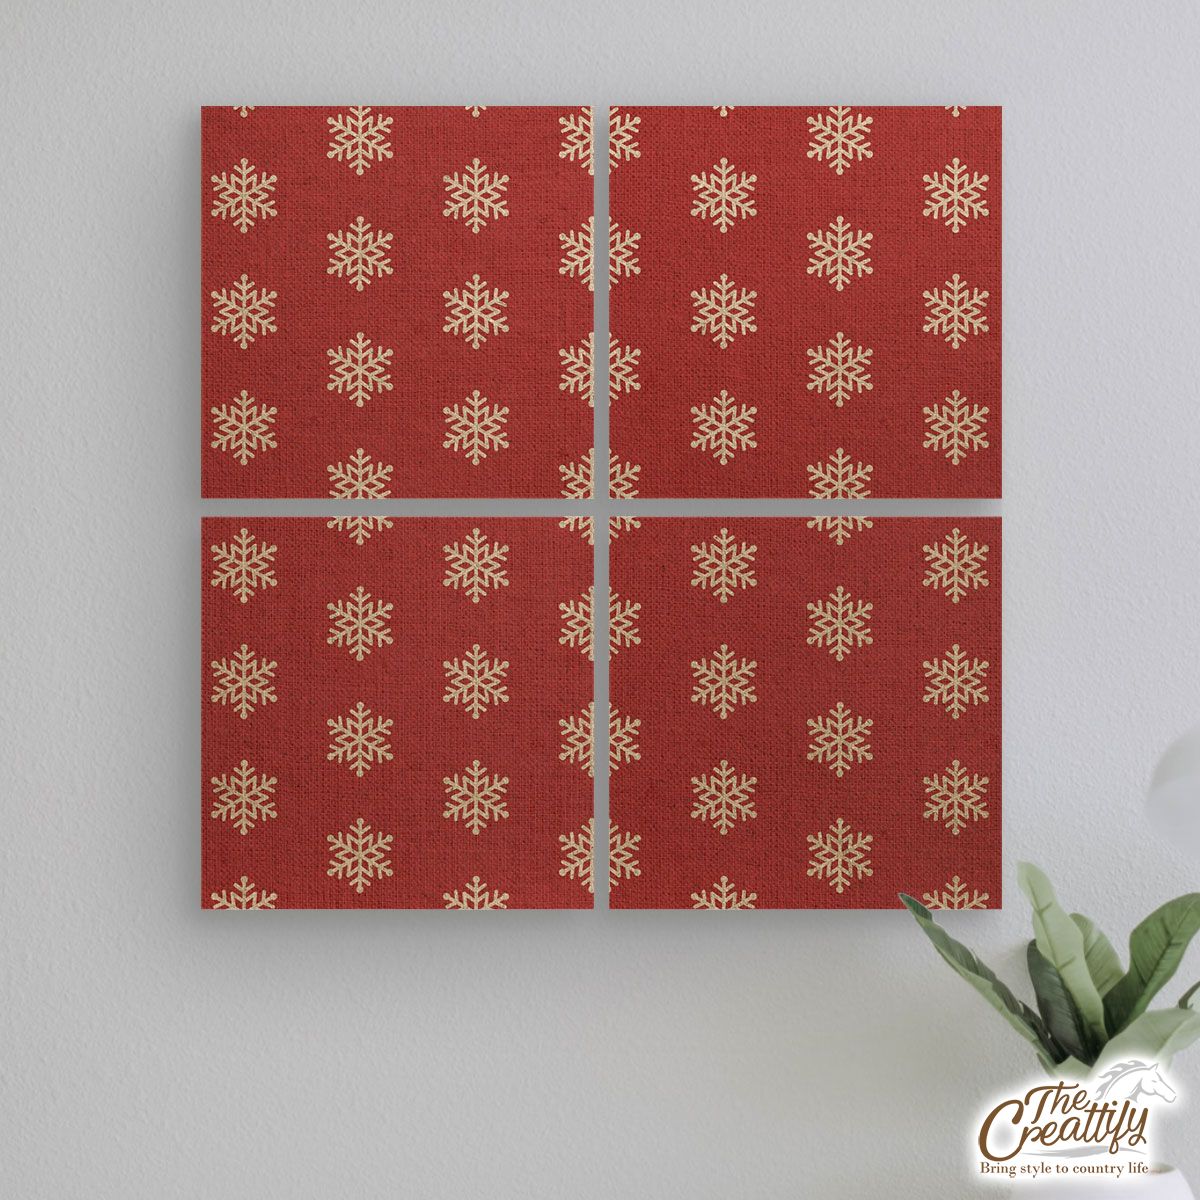 Snowflake Pattern, Christmas Snowflakes, Christmas Present Ideas On Red Background Mural With Frame